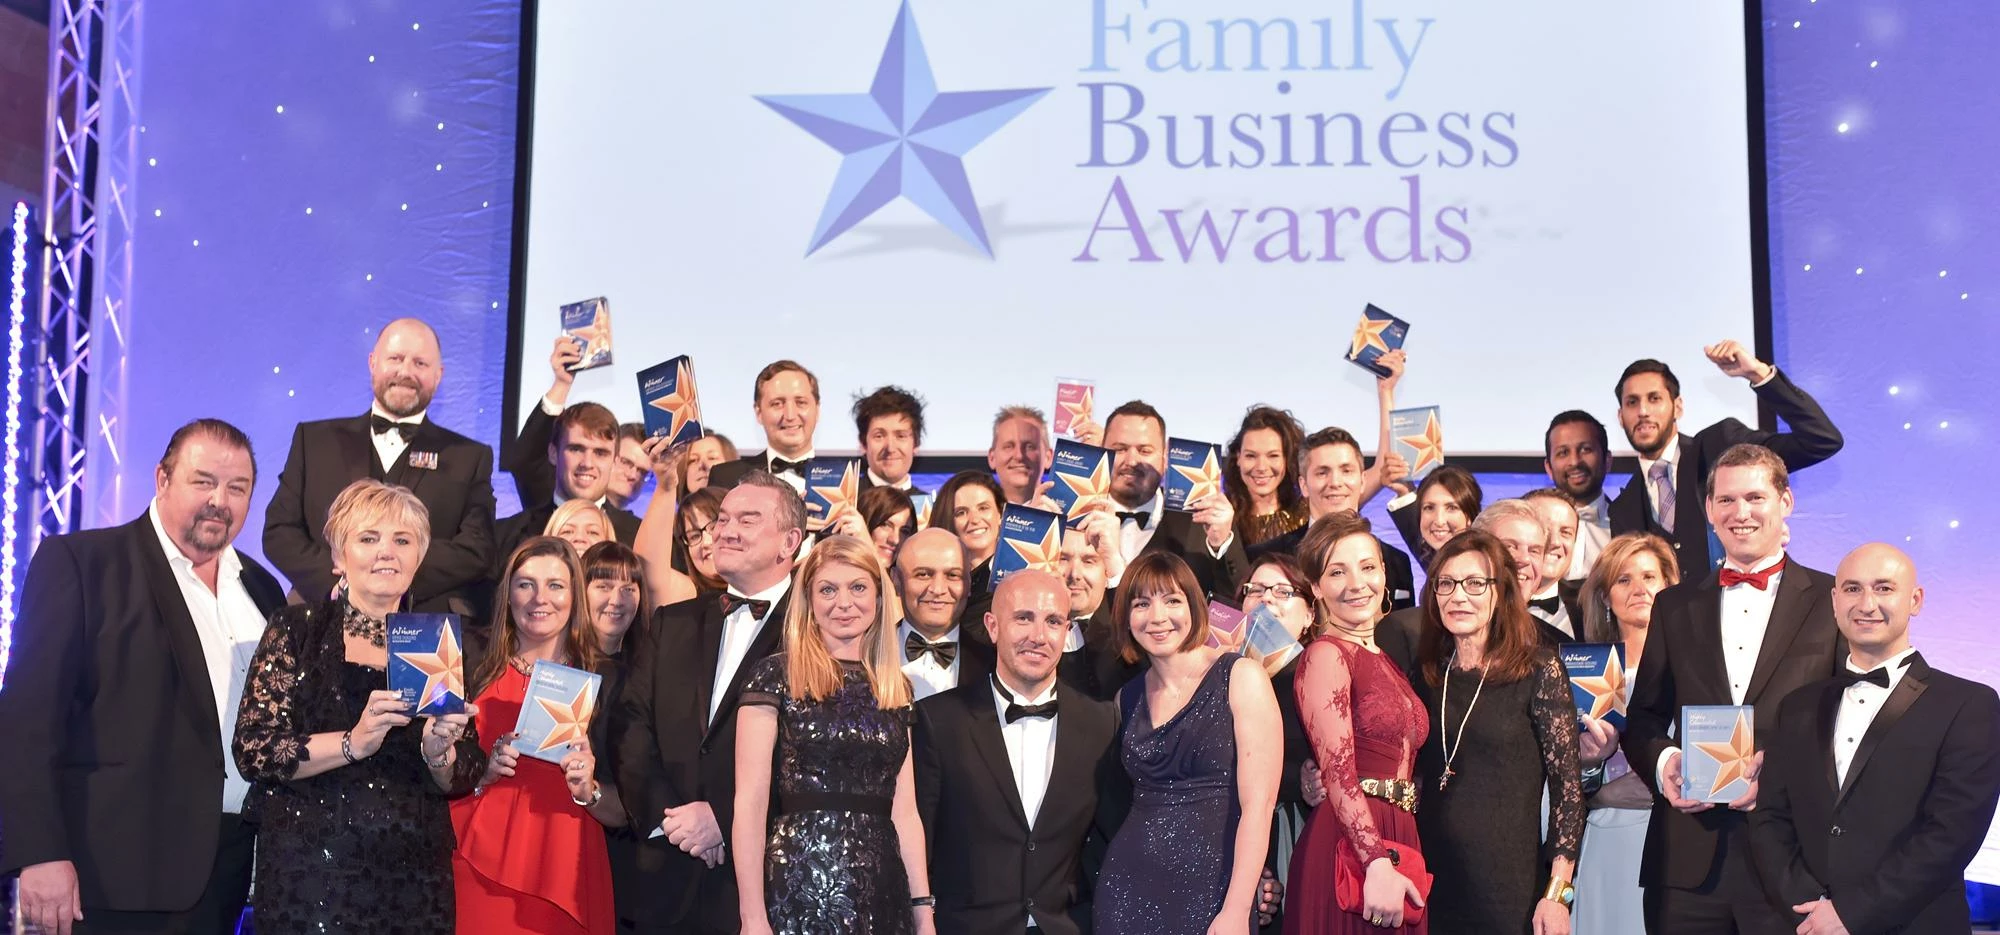 Midlands Family Business Awards 2016 winners and supporters